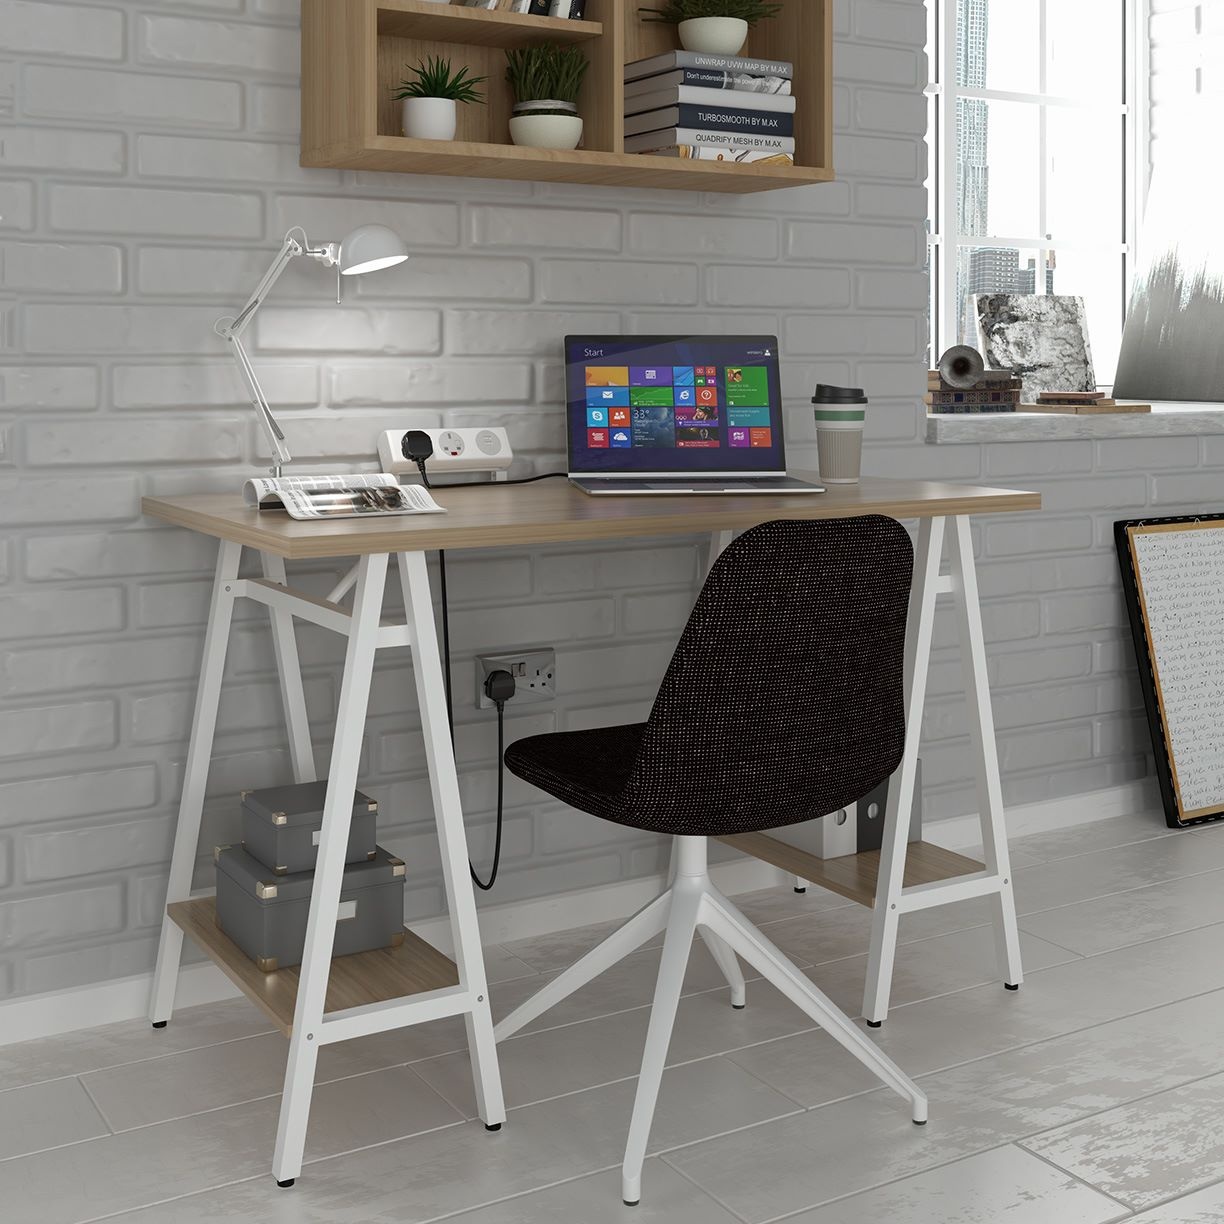 Best Trestle Desk for Small Space